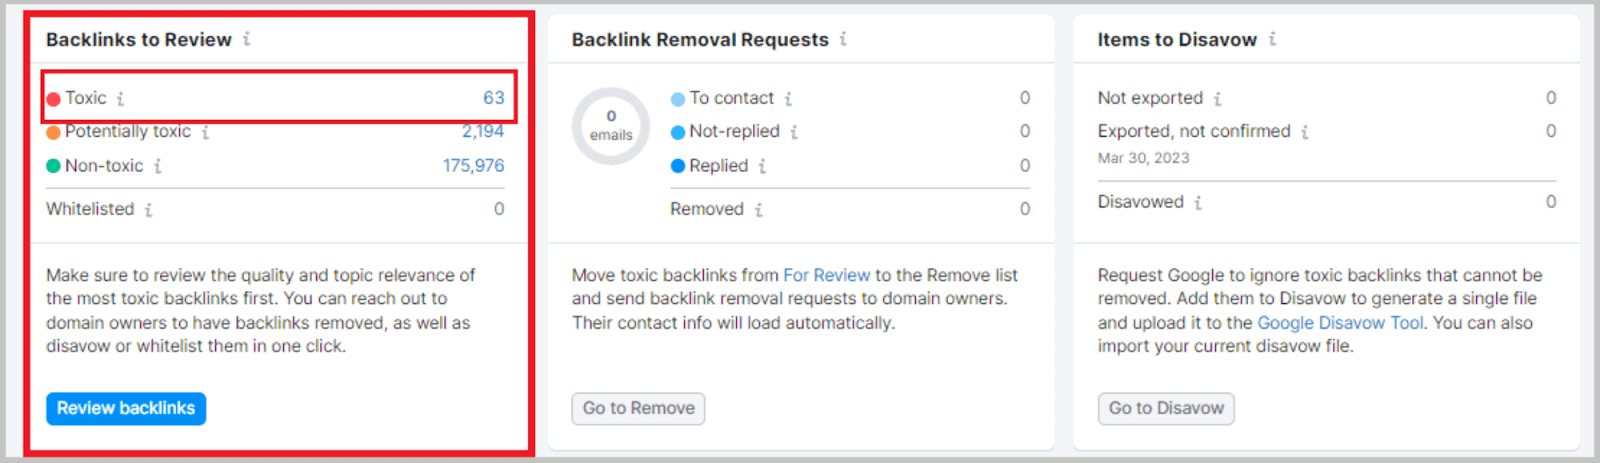 Toxic backlinks from an audit